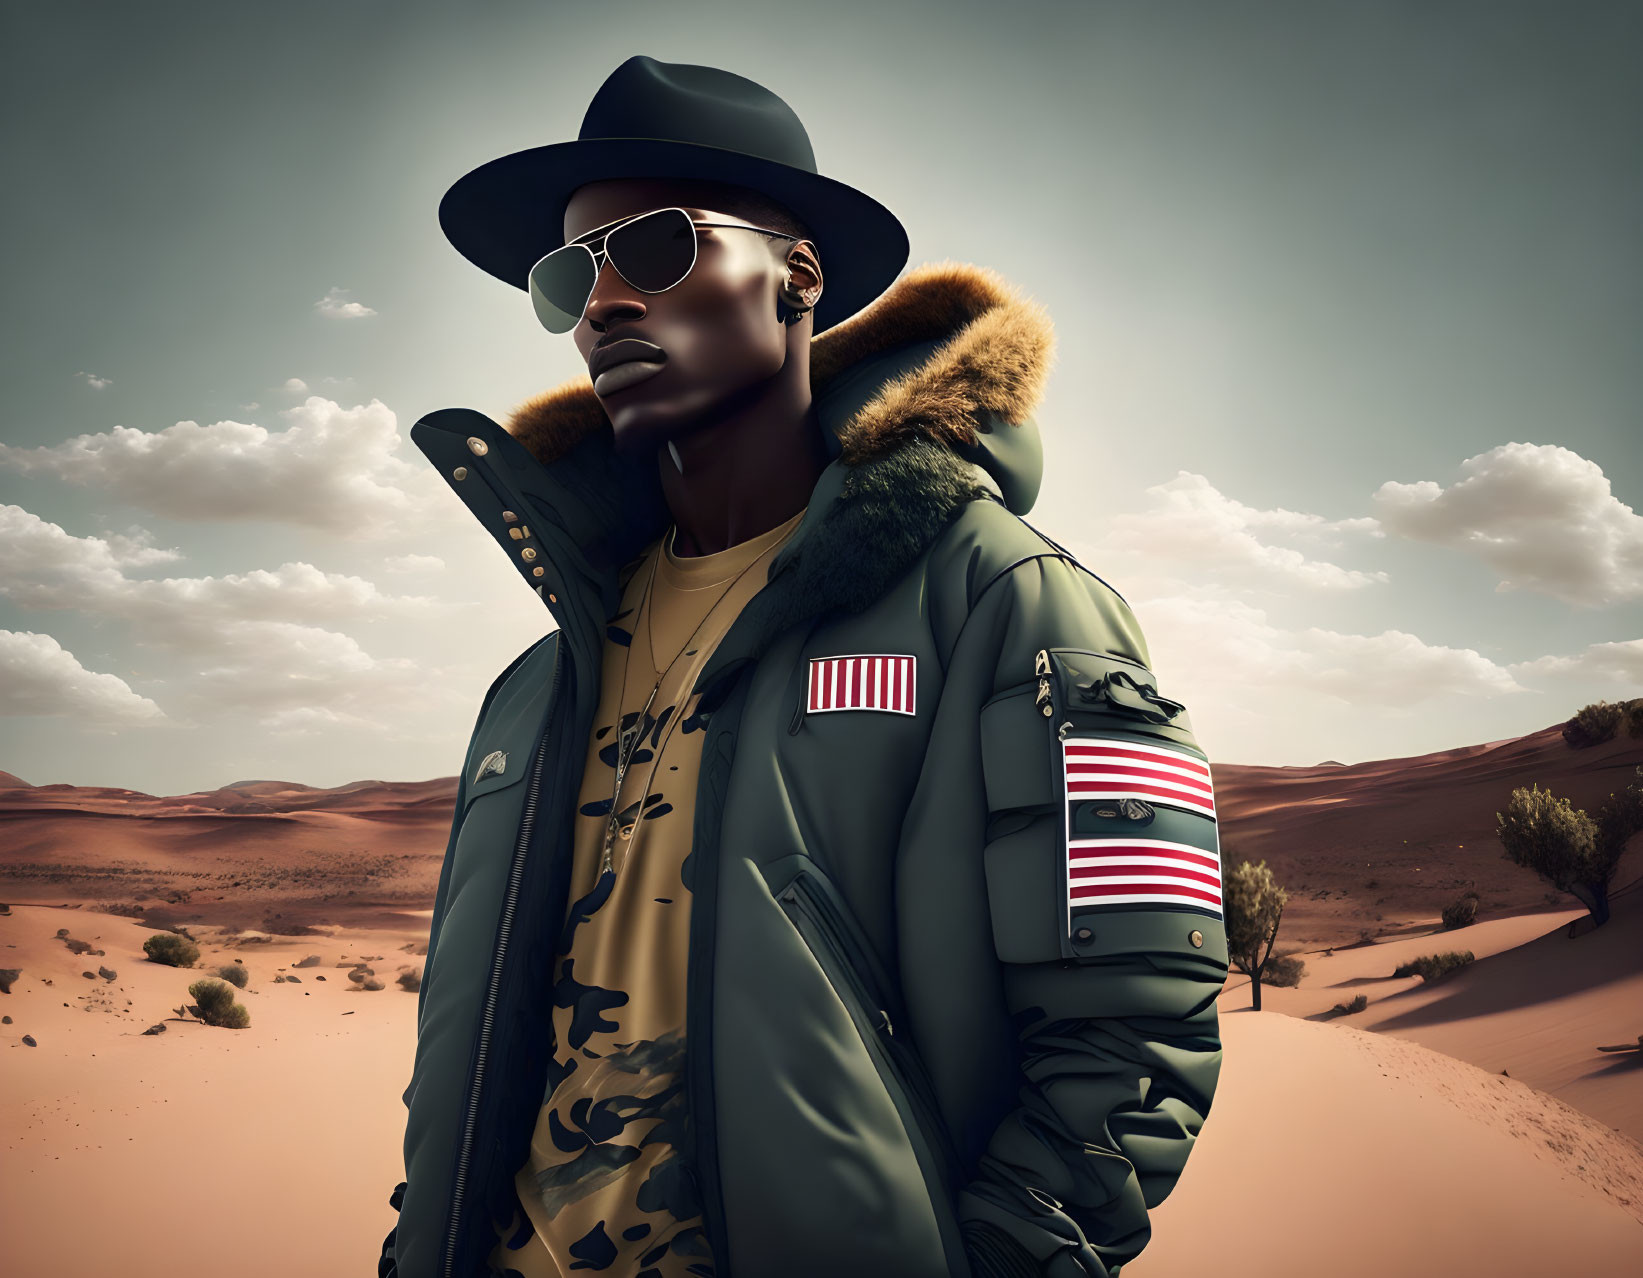 Stylized portrait of a man in bomber jacket with fur collar, hat, and sunglasses in desert